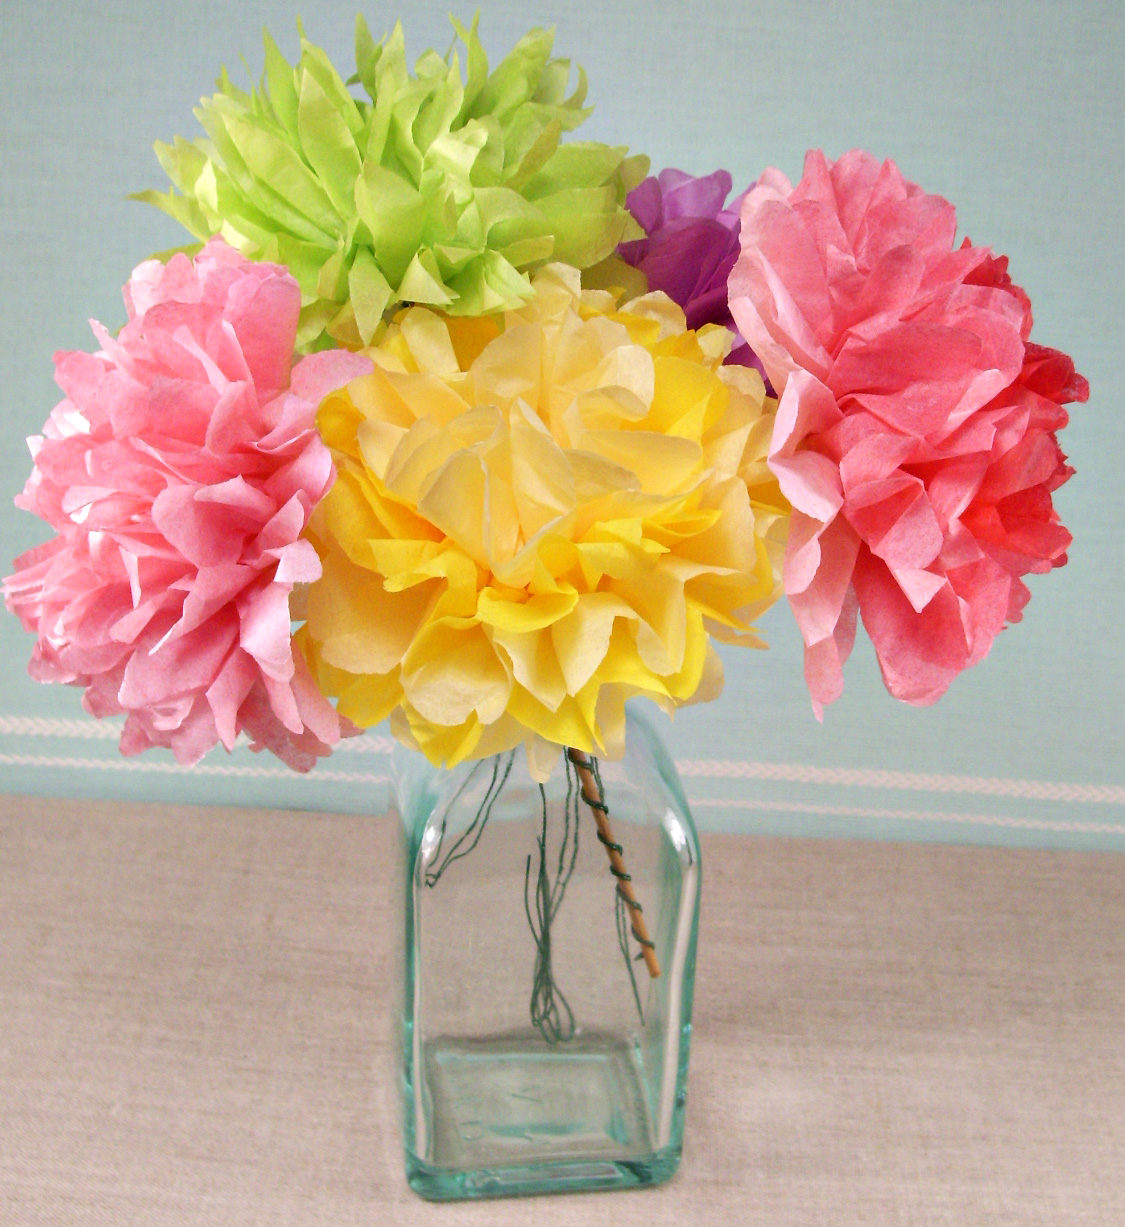 Make Tissue Paper Flowers  Alzheimer's Activities and More!